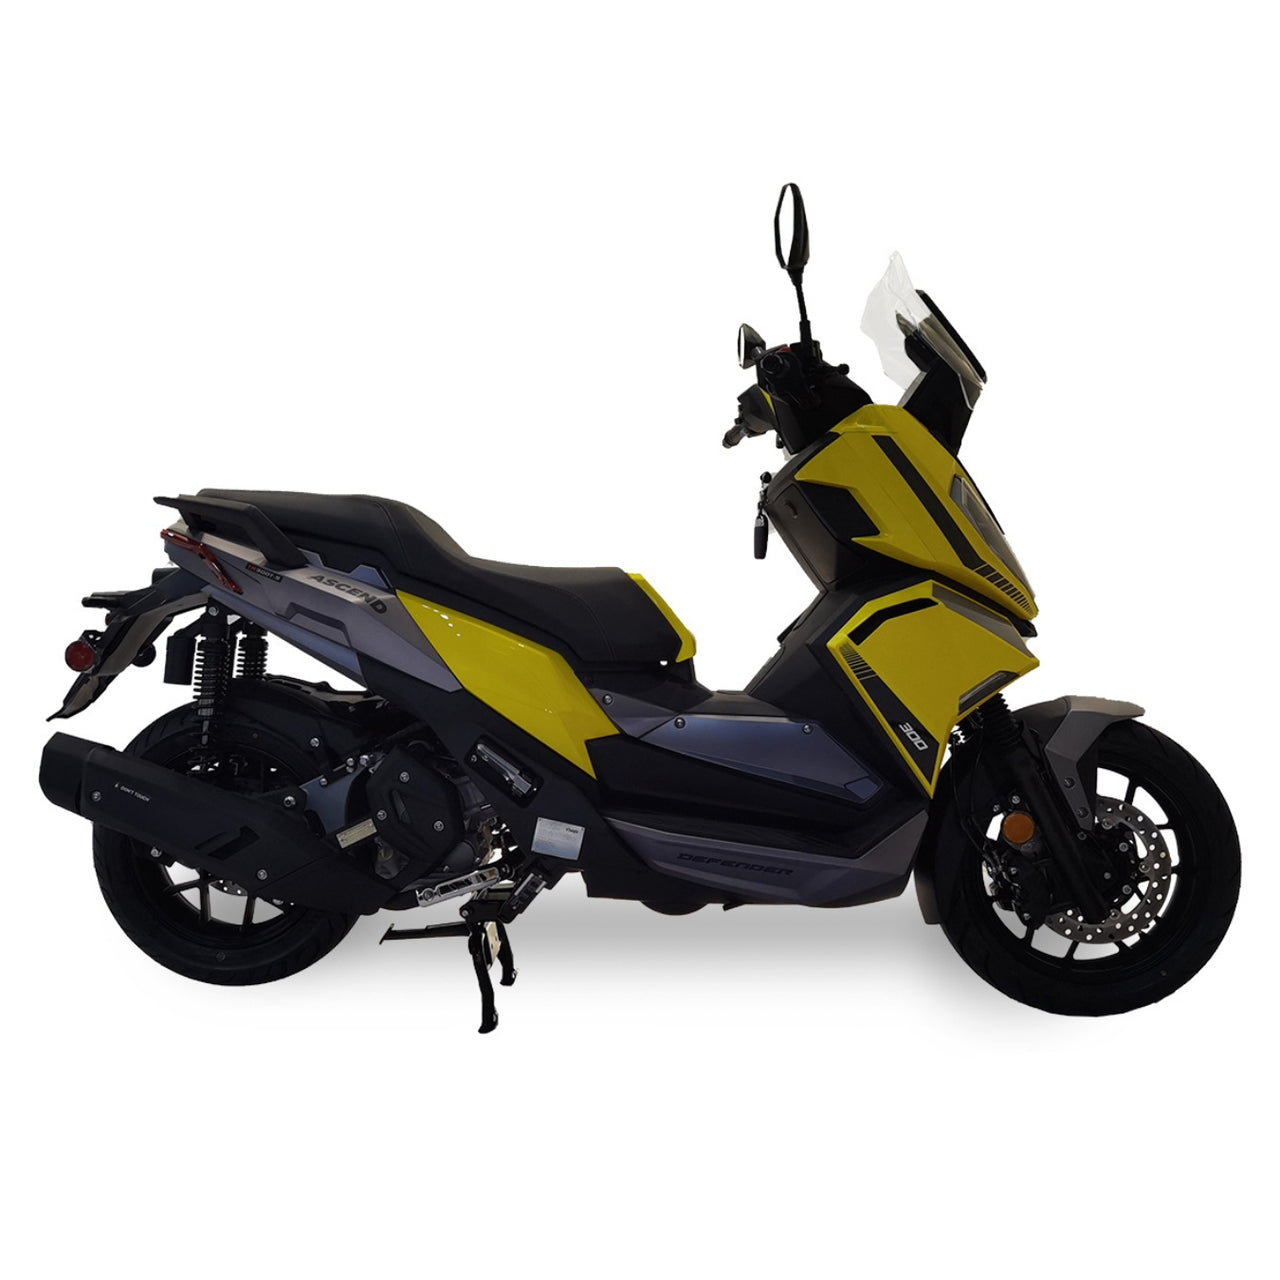 IceBear Ascend Defender 300cc Motorcycle